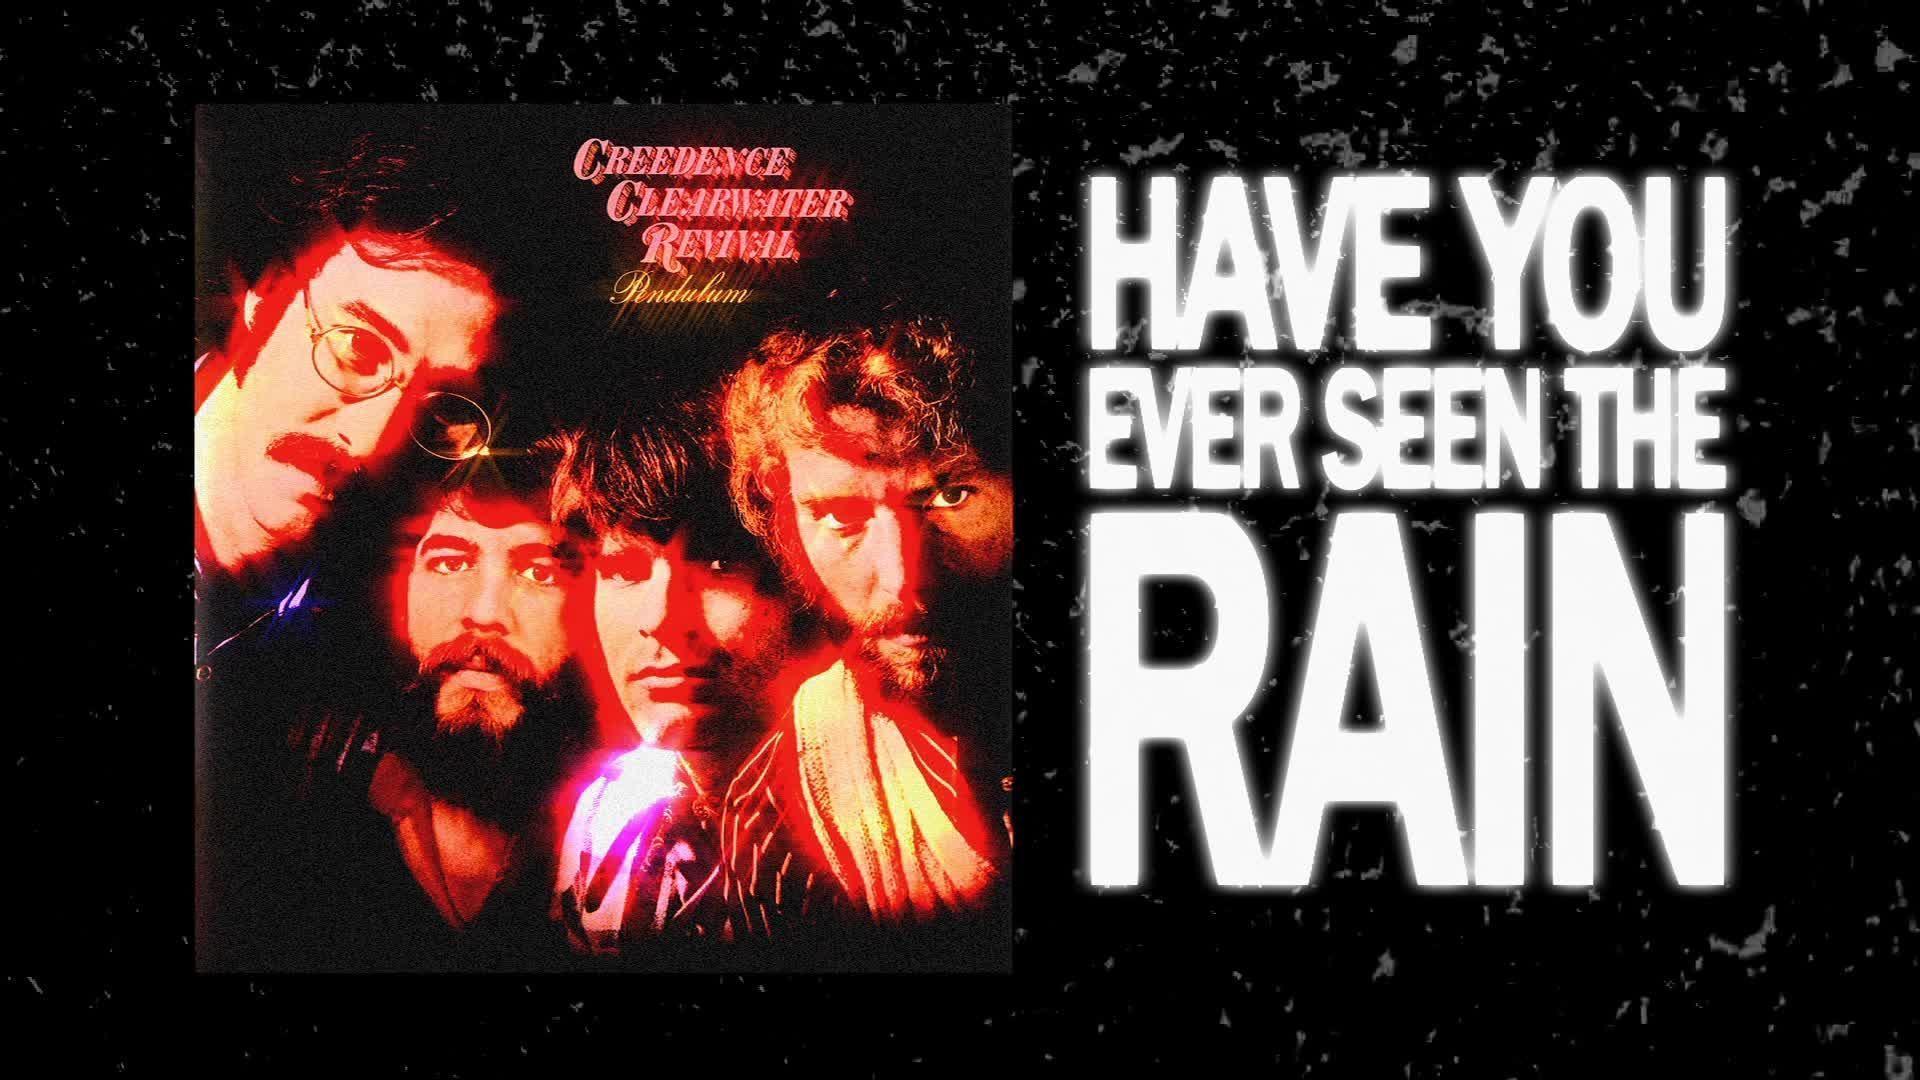 Creedence rain. Creedence Clearwater Revival. Группа Creedence Clearwater Revival. Have you ever seen the Rain.